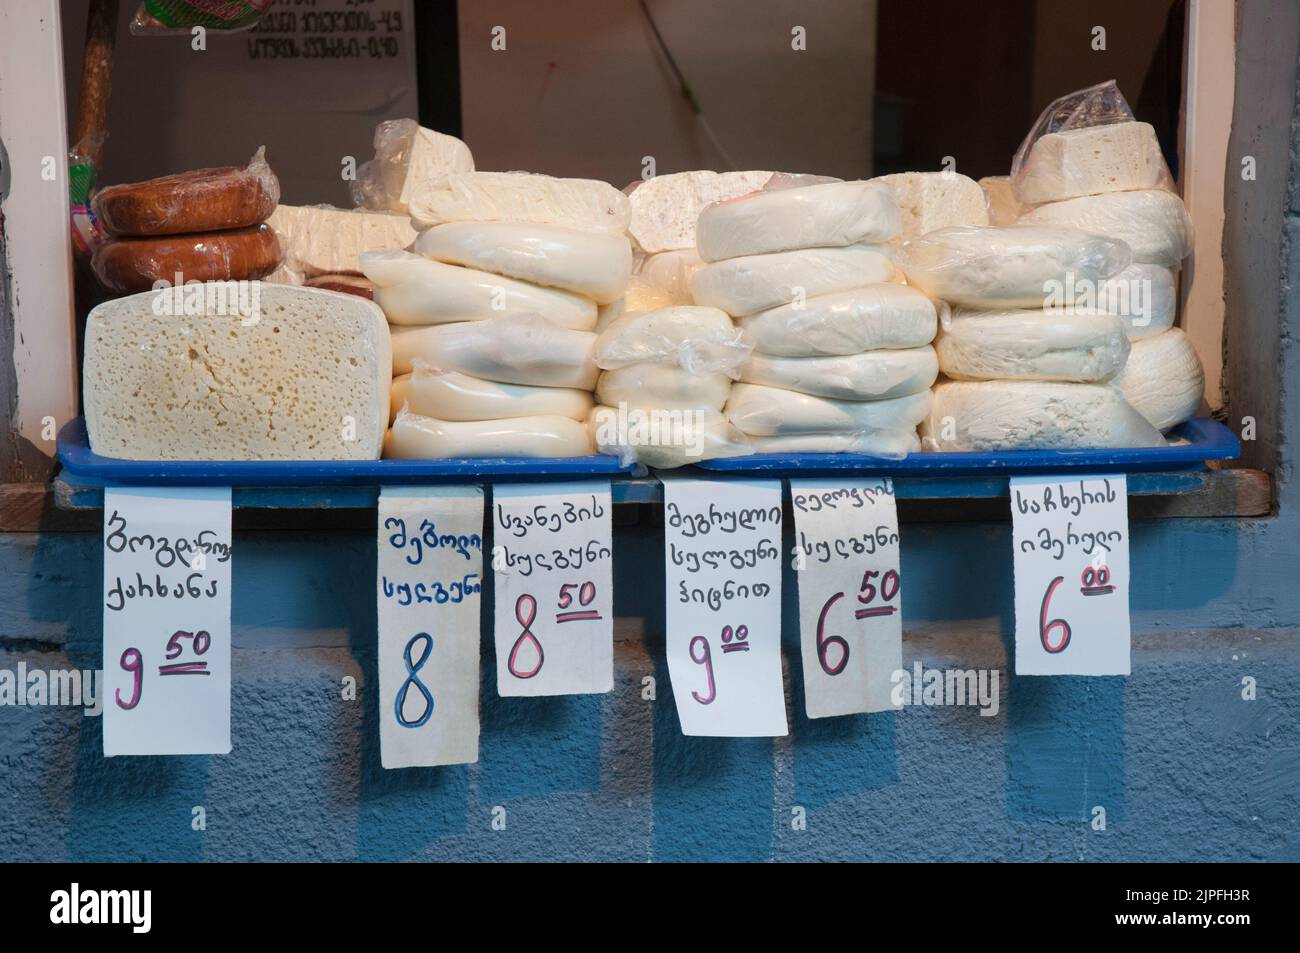 Cheeses displayed for sale in a store in Tbilisi, capital of the Caucasian republic of Georgia Stock Photo